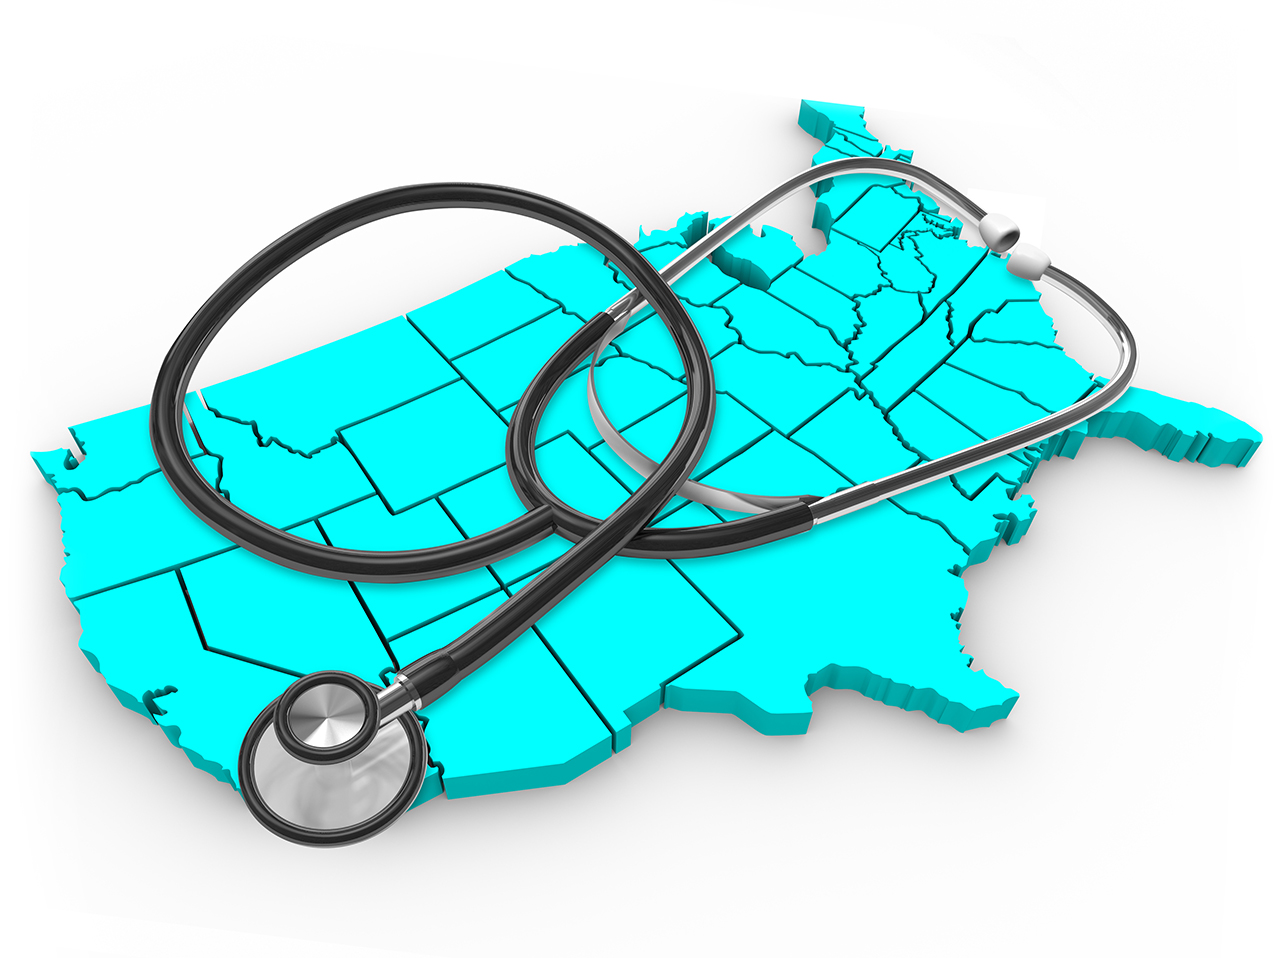 As IRS Section 1332 Support Continues, Can States Reform Healthcare On Their Own?